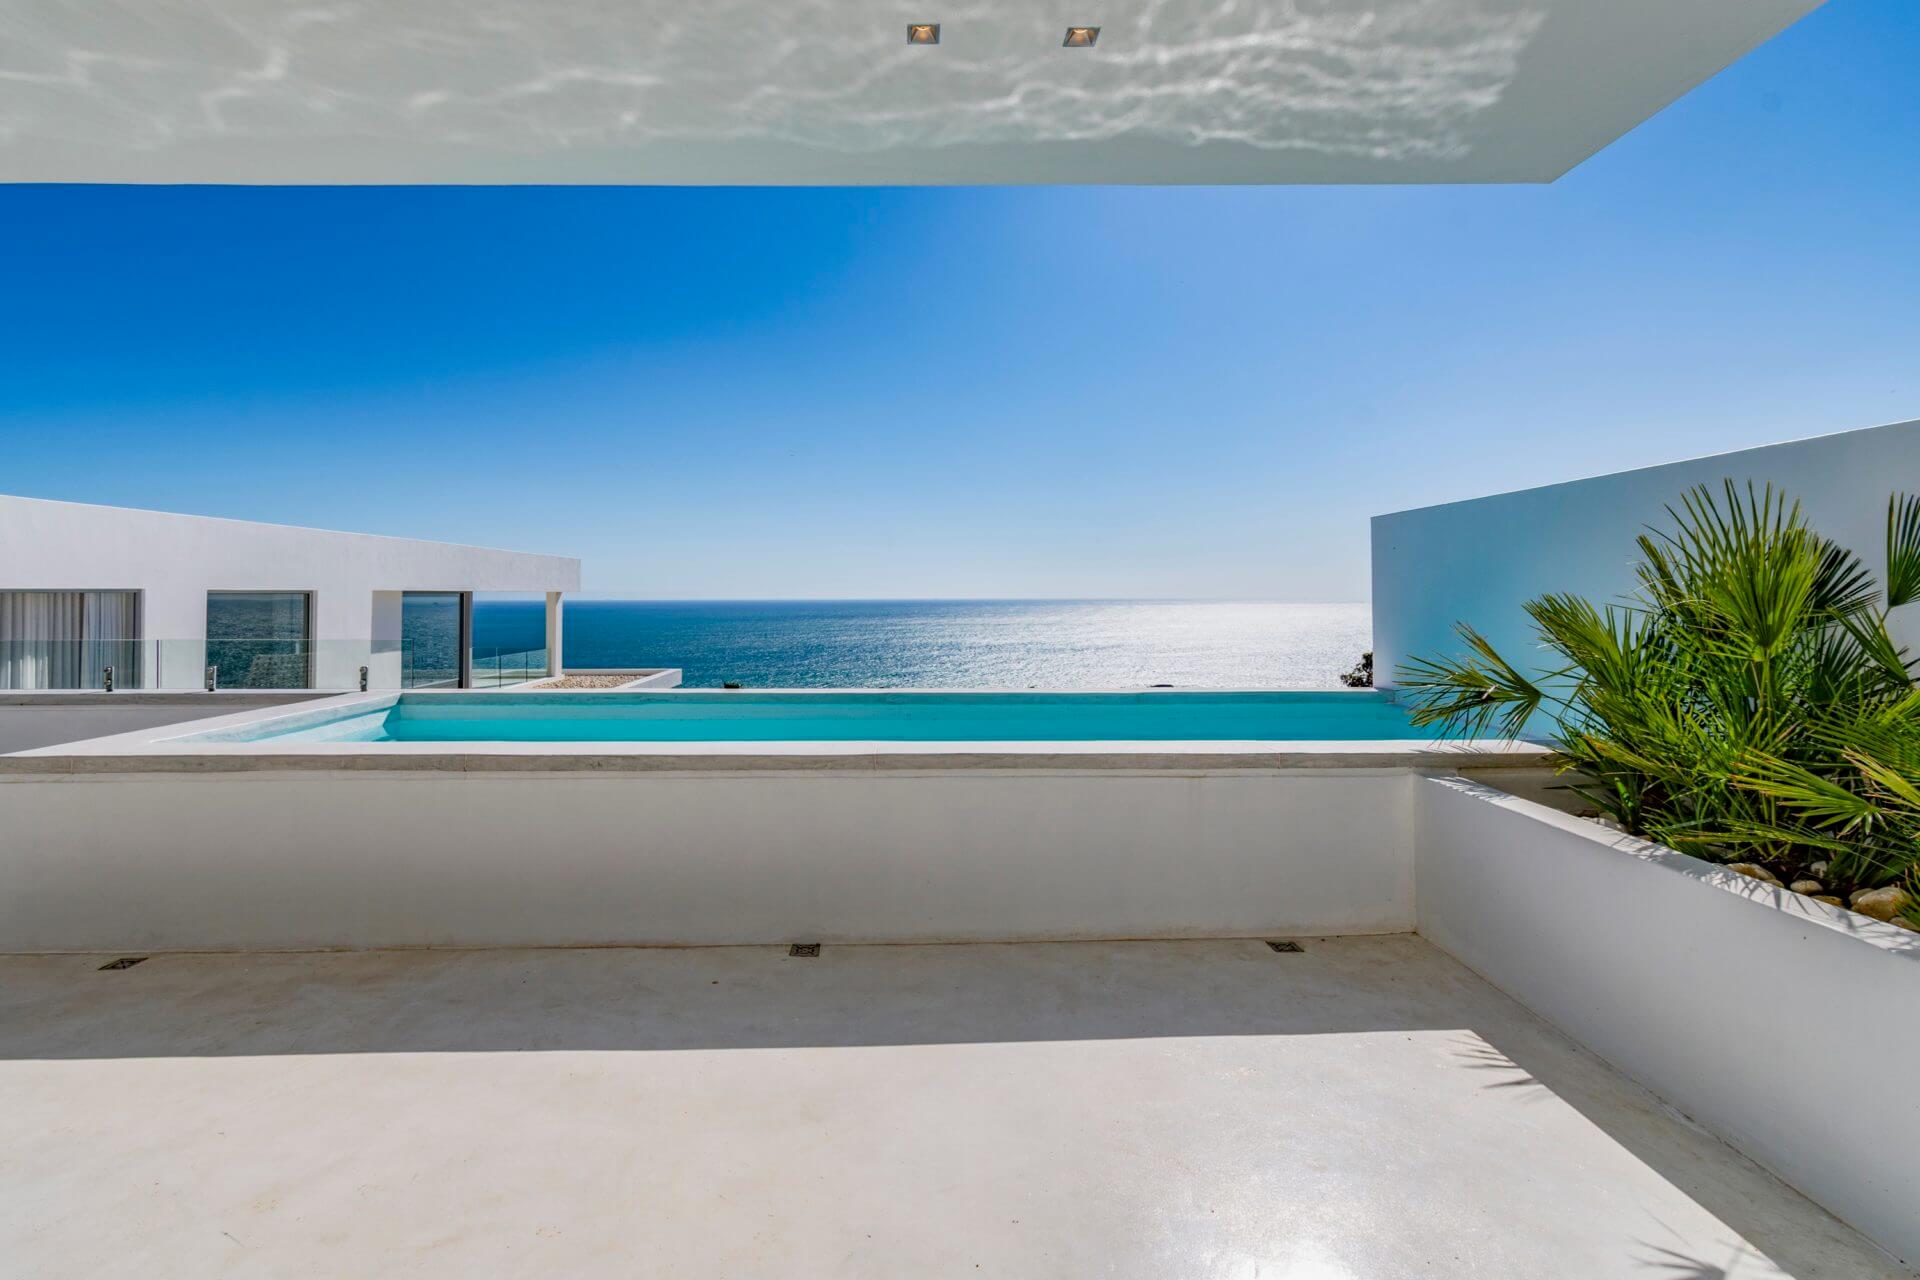 Photo 28 of Villa Ibiza accommodation in Camps Bay, Cape Town with 8 bedrooms and 8 bathrooms